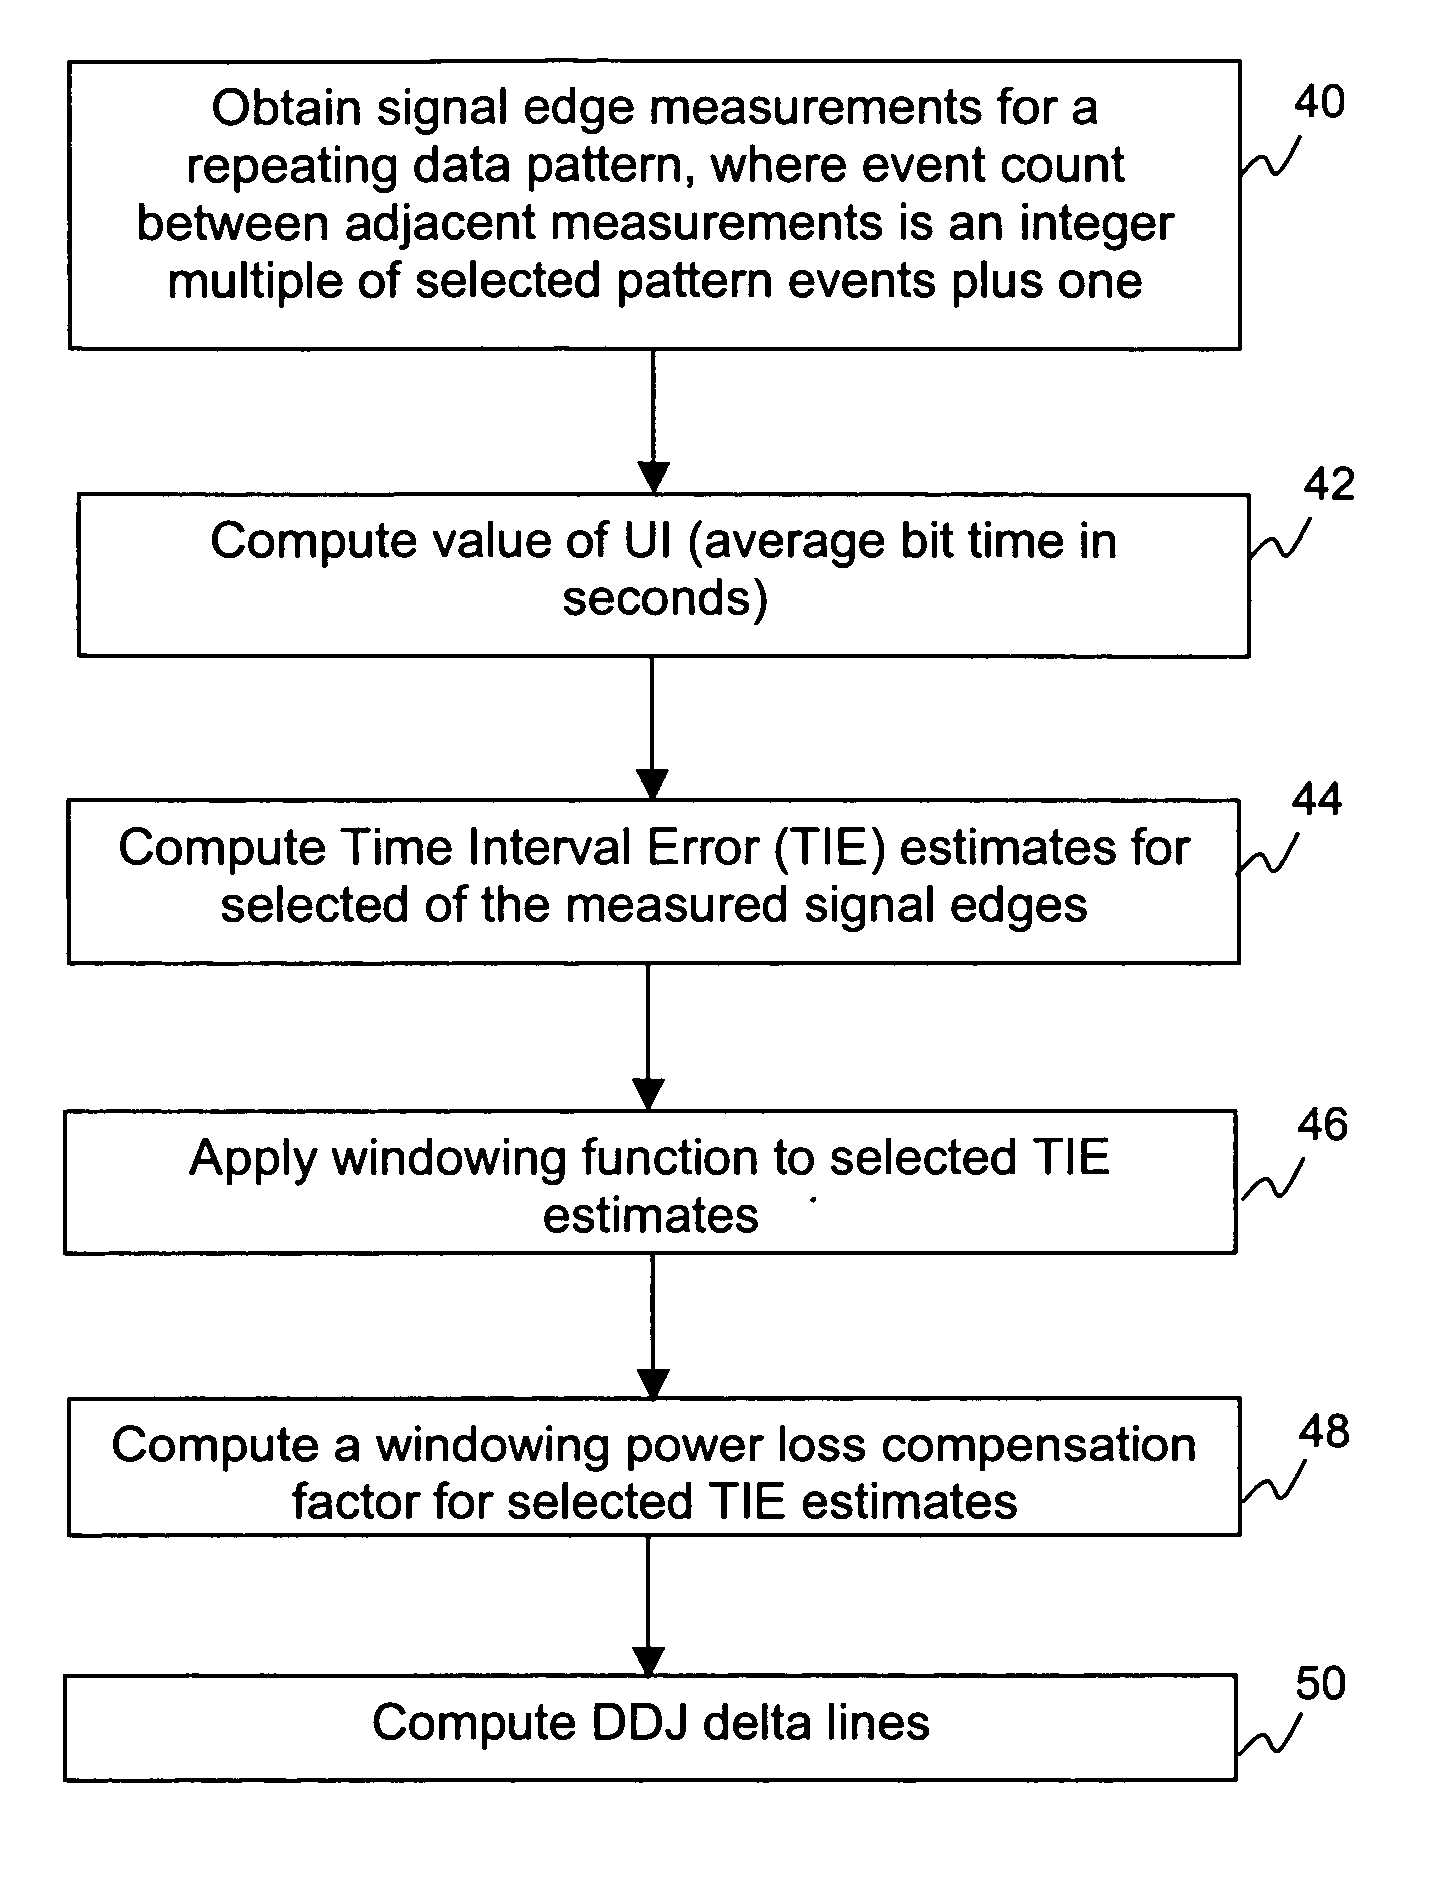 System and method of obtaining data-dependent jitter (DDJ) estimates from measured signal data